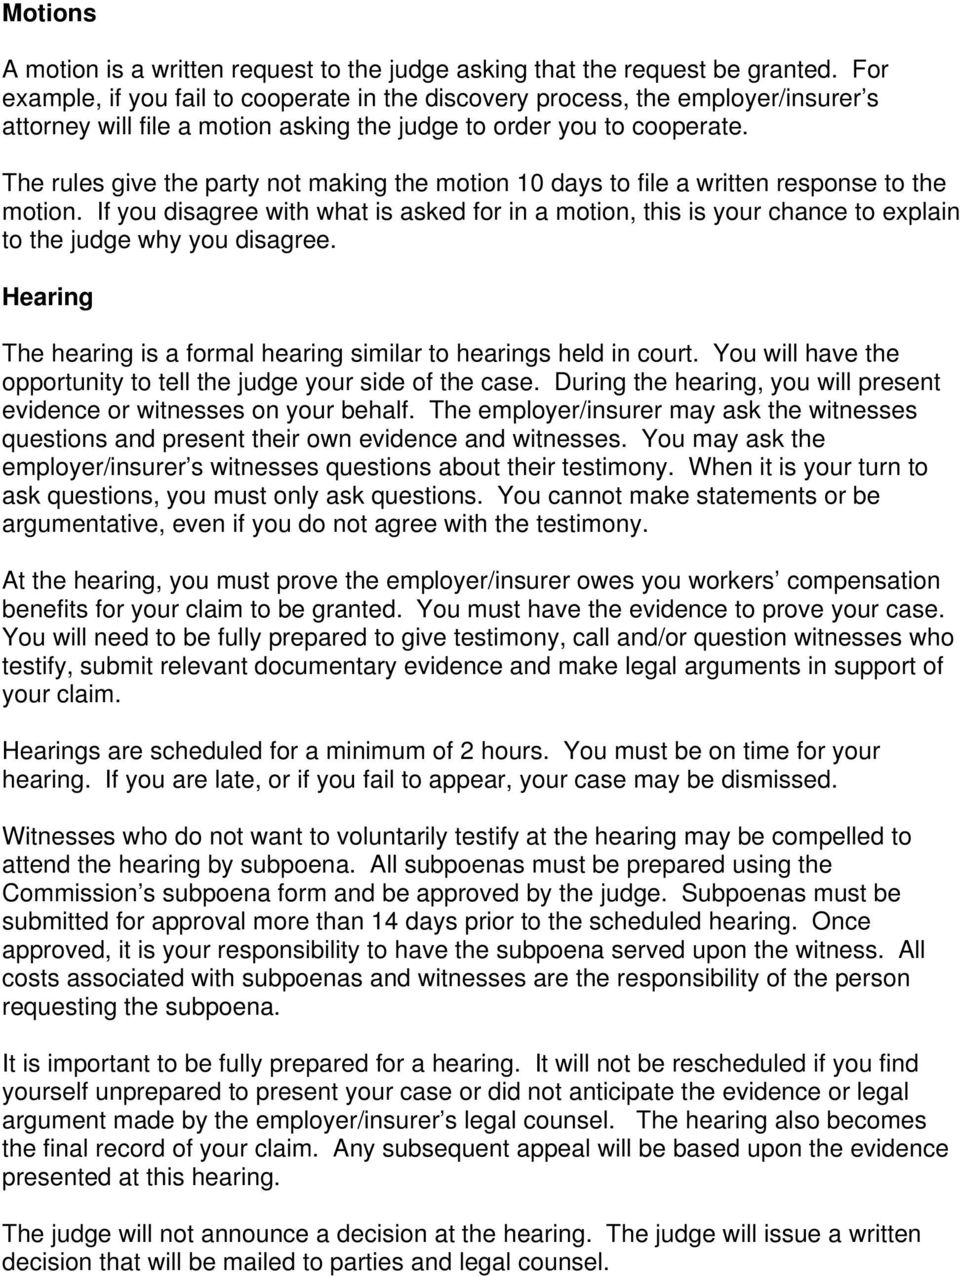 The rules give the party not making the motion 10 days to file a written response to the motion.